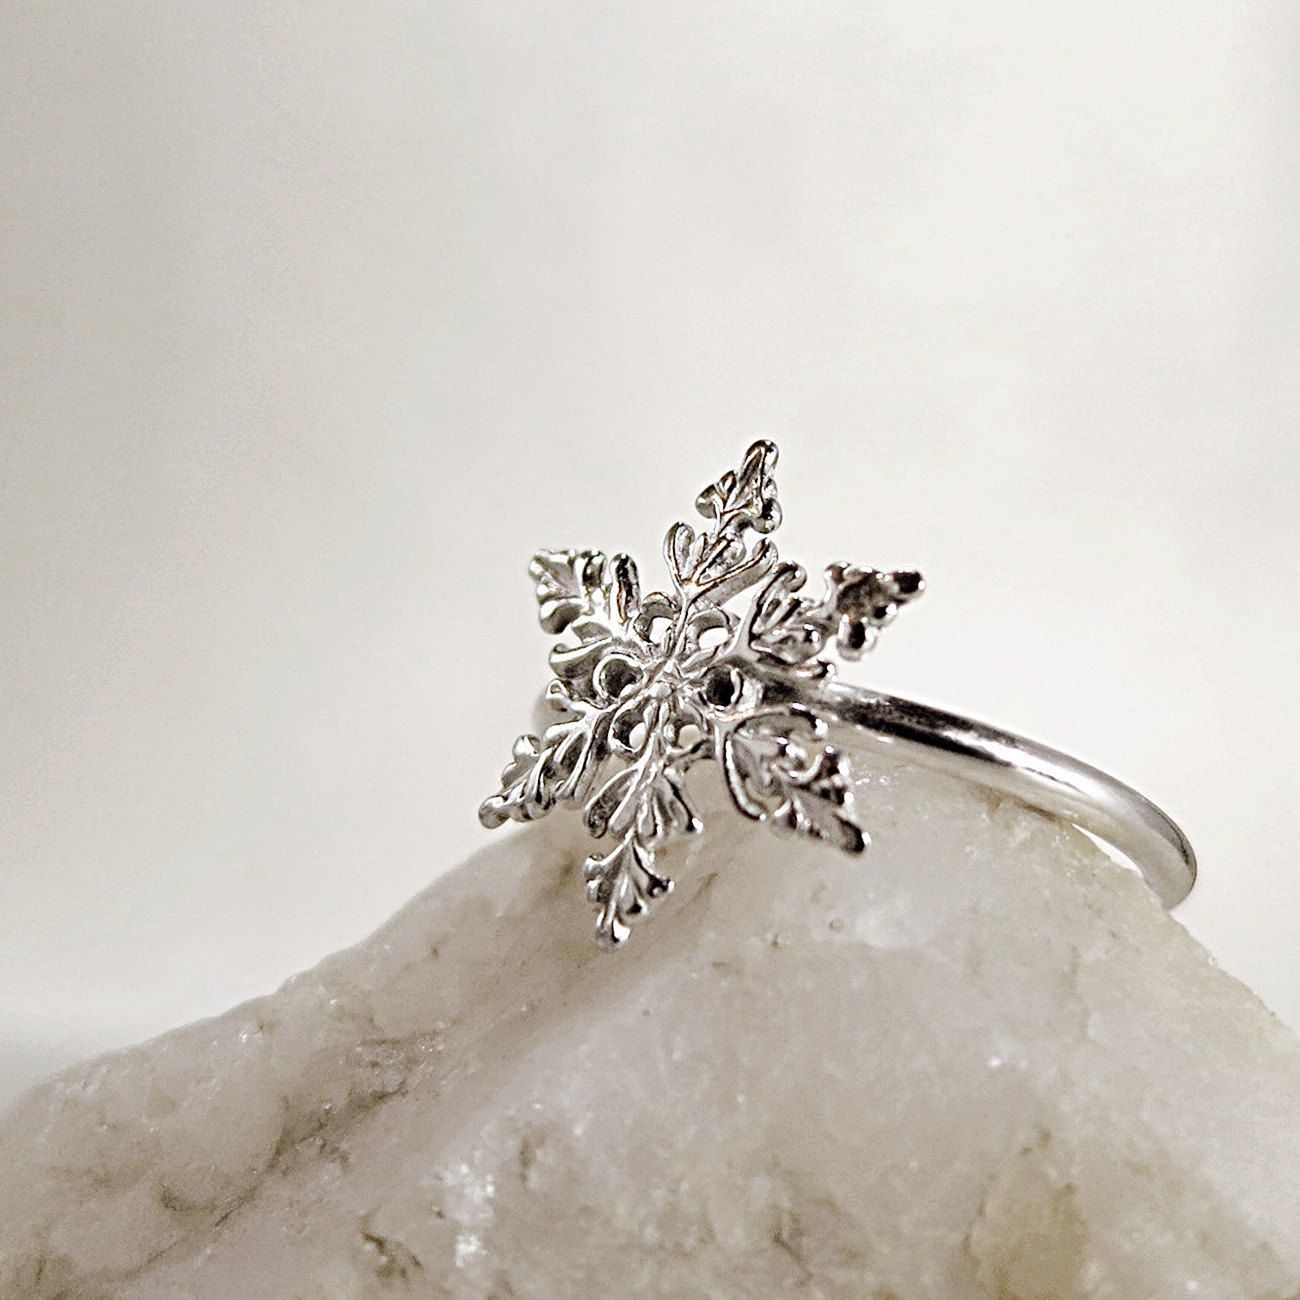 Snowflake ring in sterling silverstackable winter jewelry from etsy